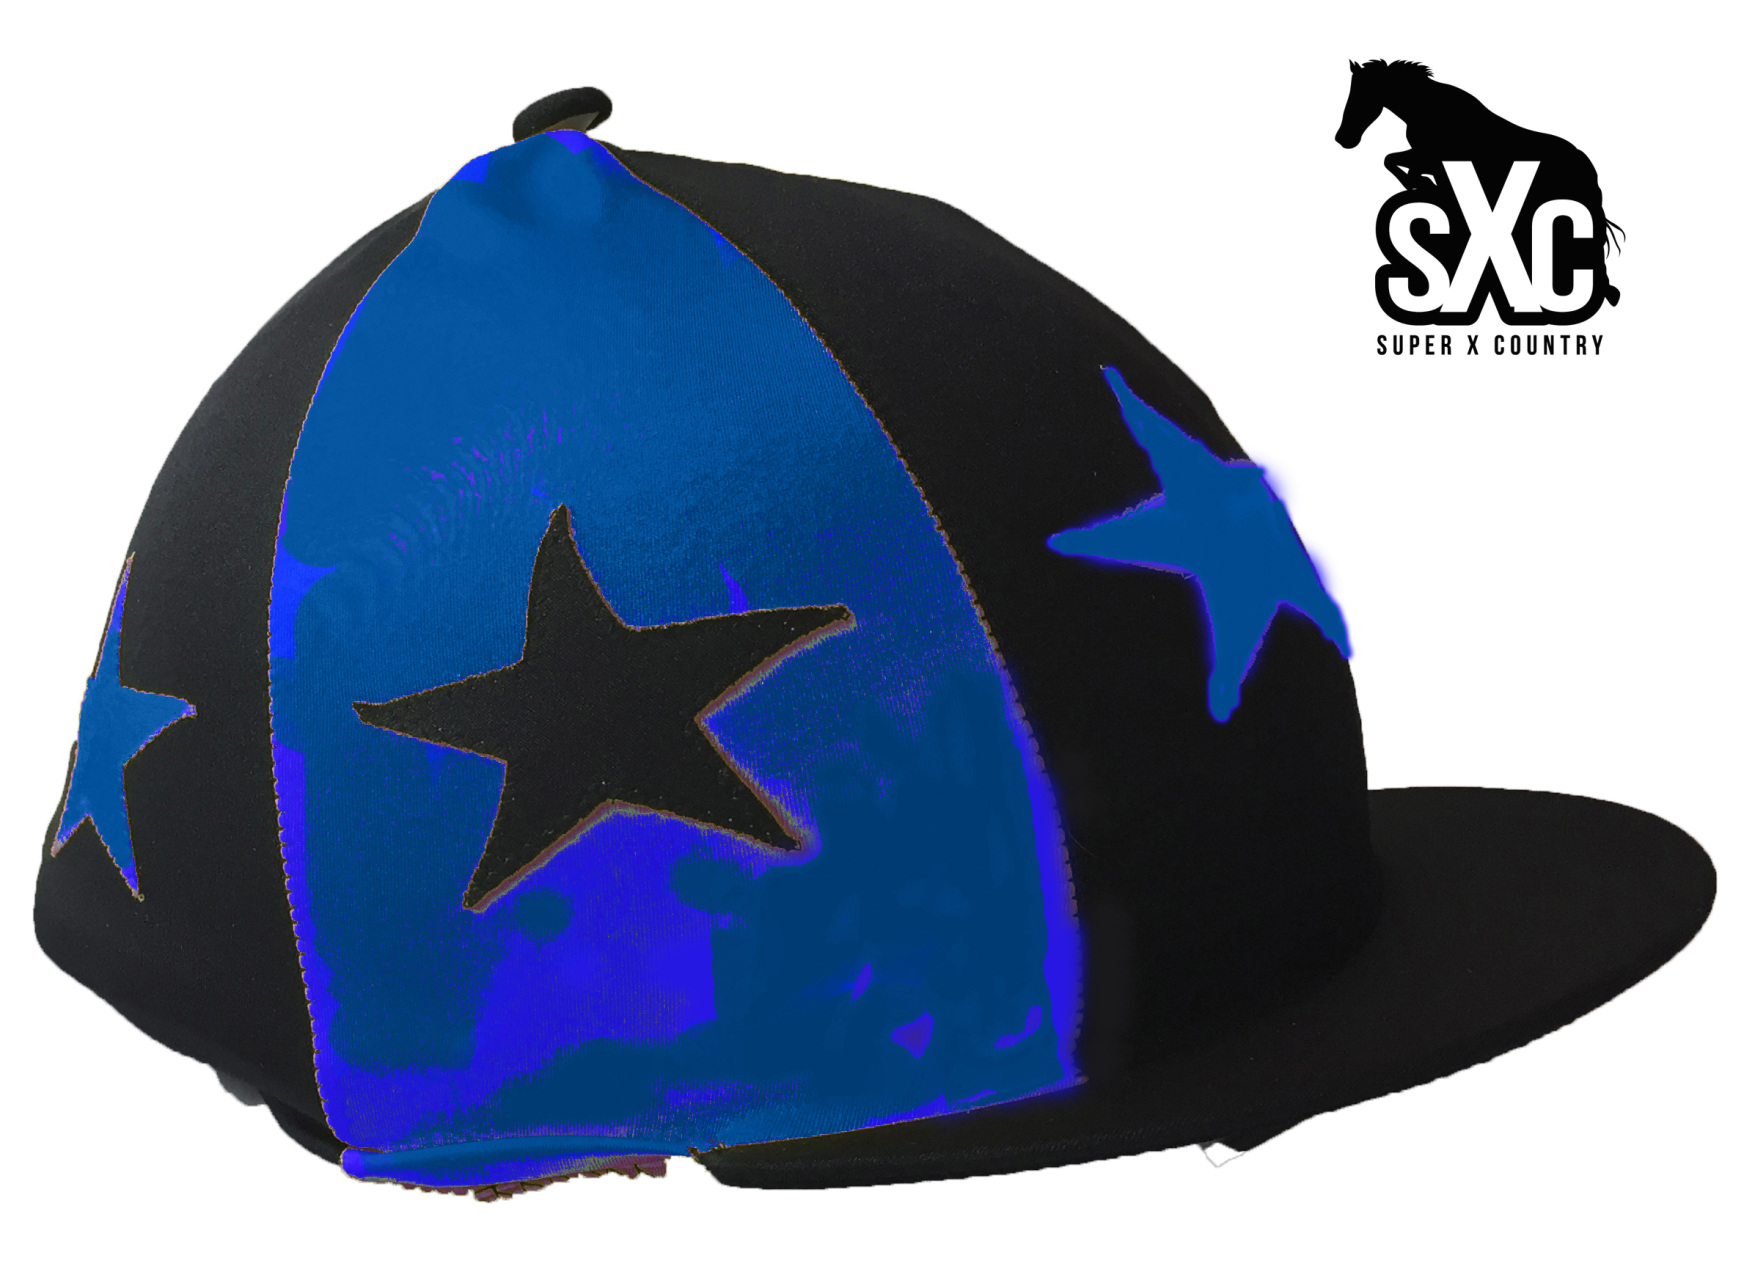 SXC PRINTED RIDING HAT SILK COVER NAVY AND BABY PINK ALTERNATE STARS POMPOM 